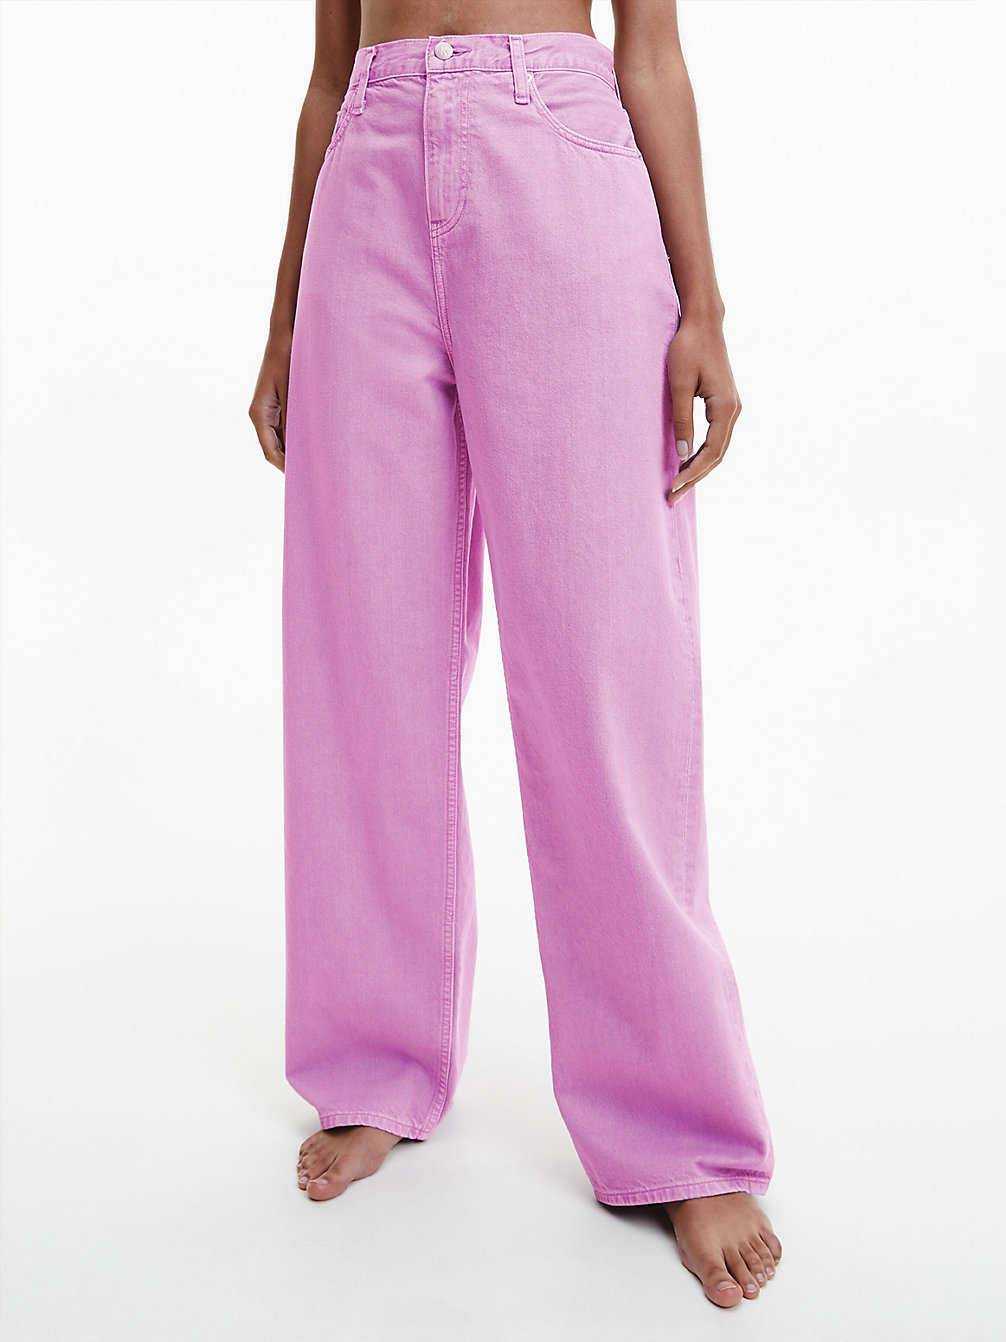 LAVENDER High Rise Relaxed Jeans undefined women Calvin Klein